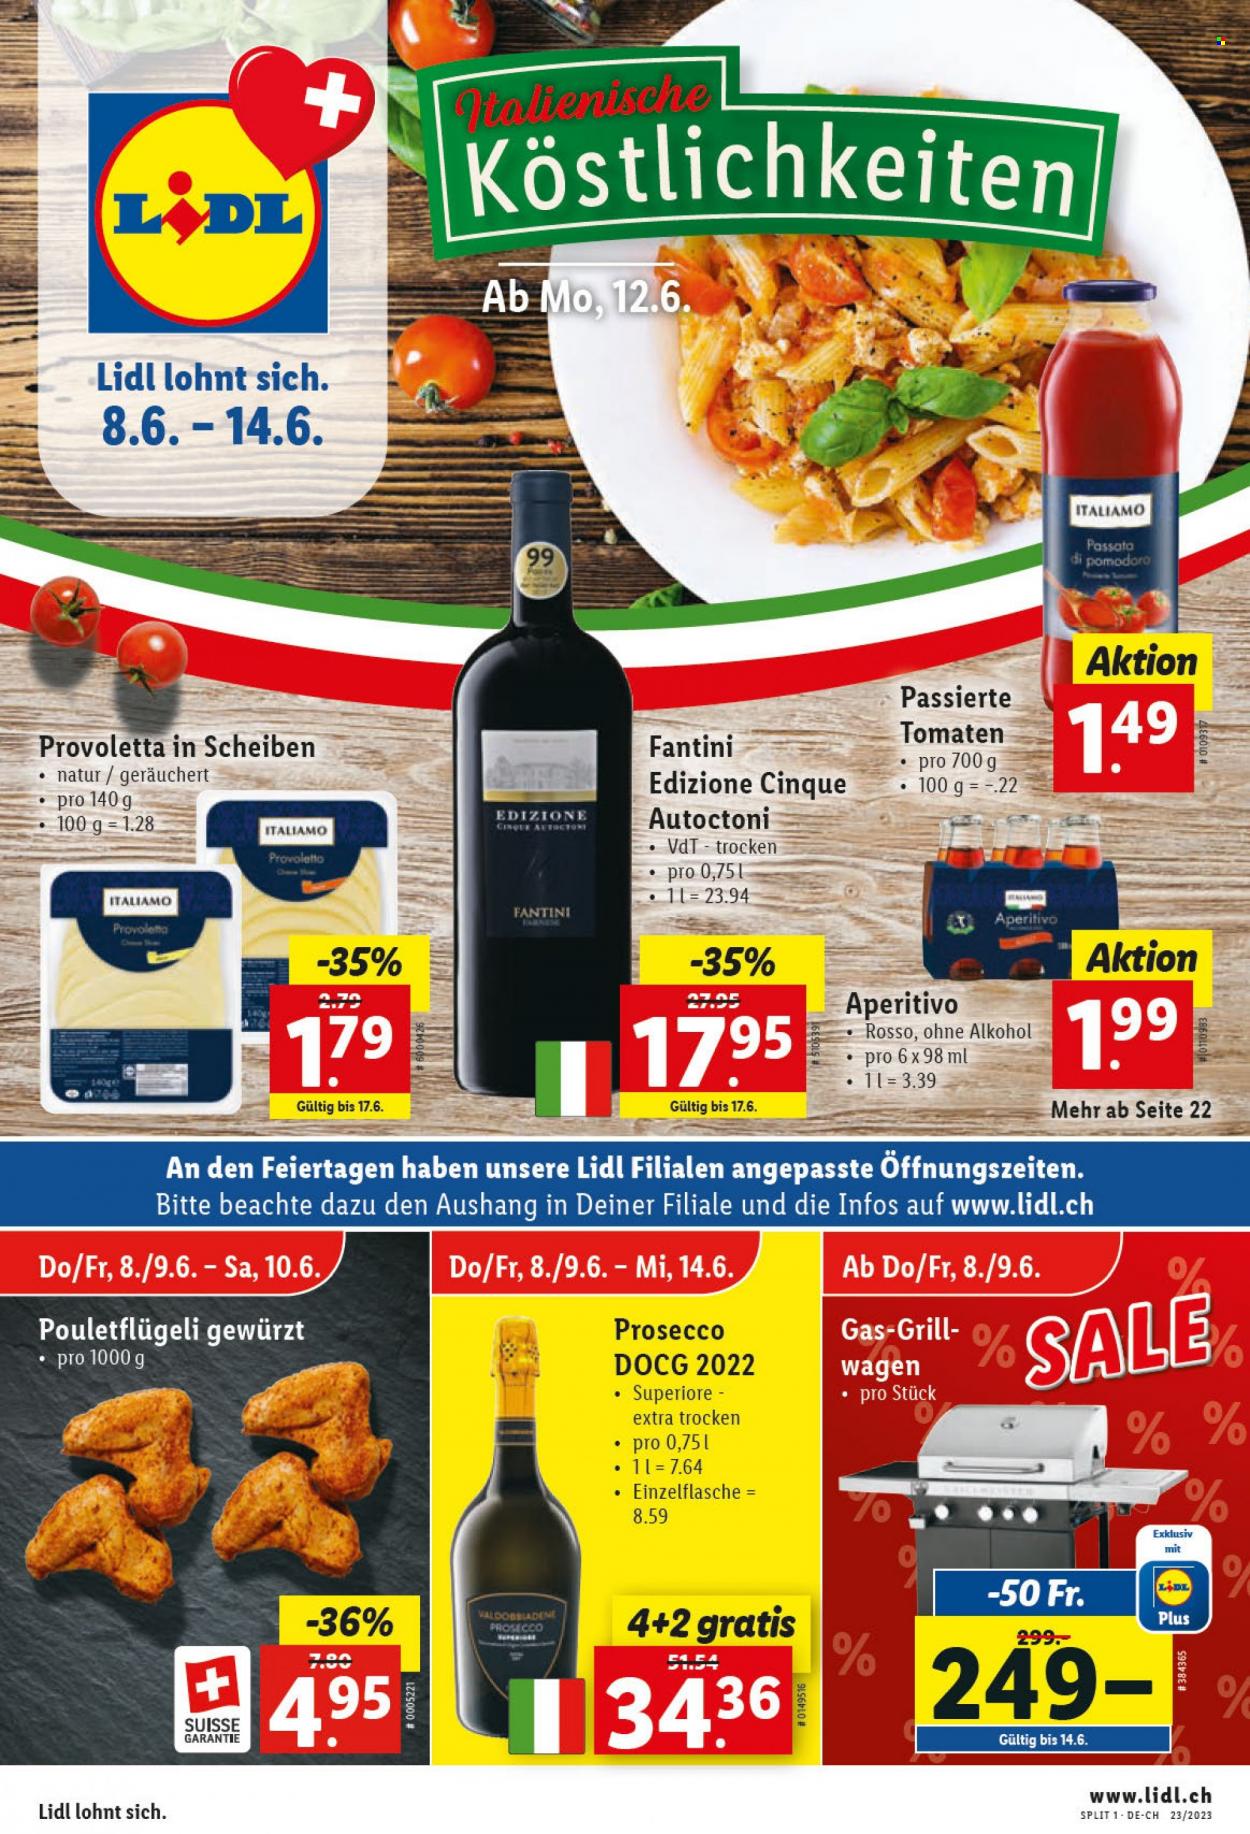 Catalogue Lidl - 8.6.2023 - 14.6.2023. Page 1.